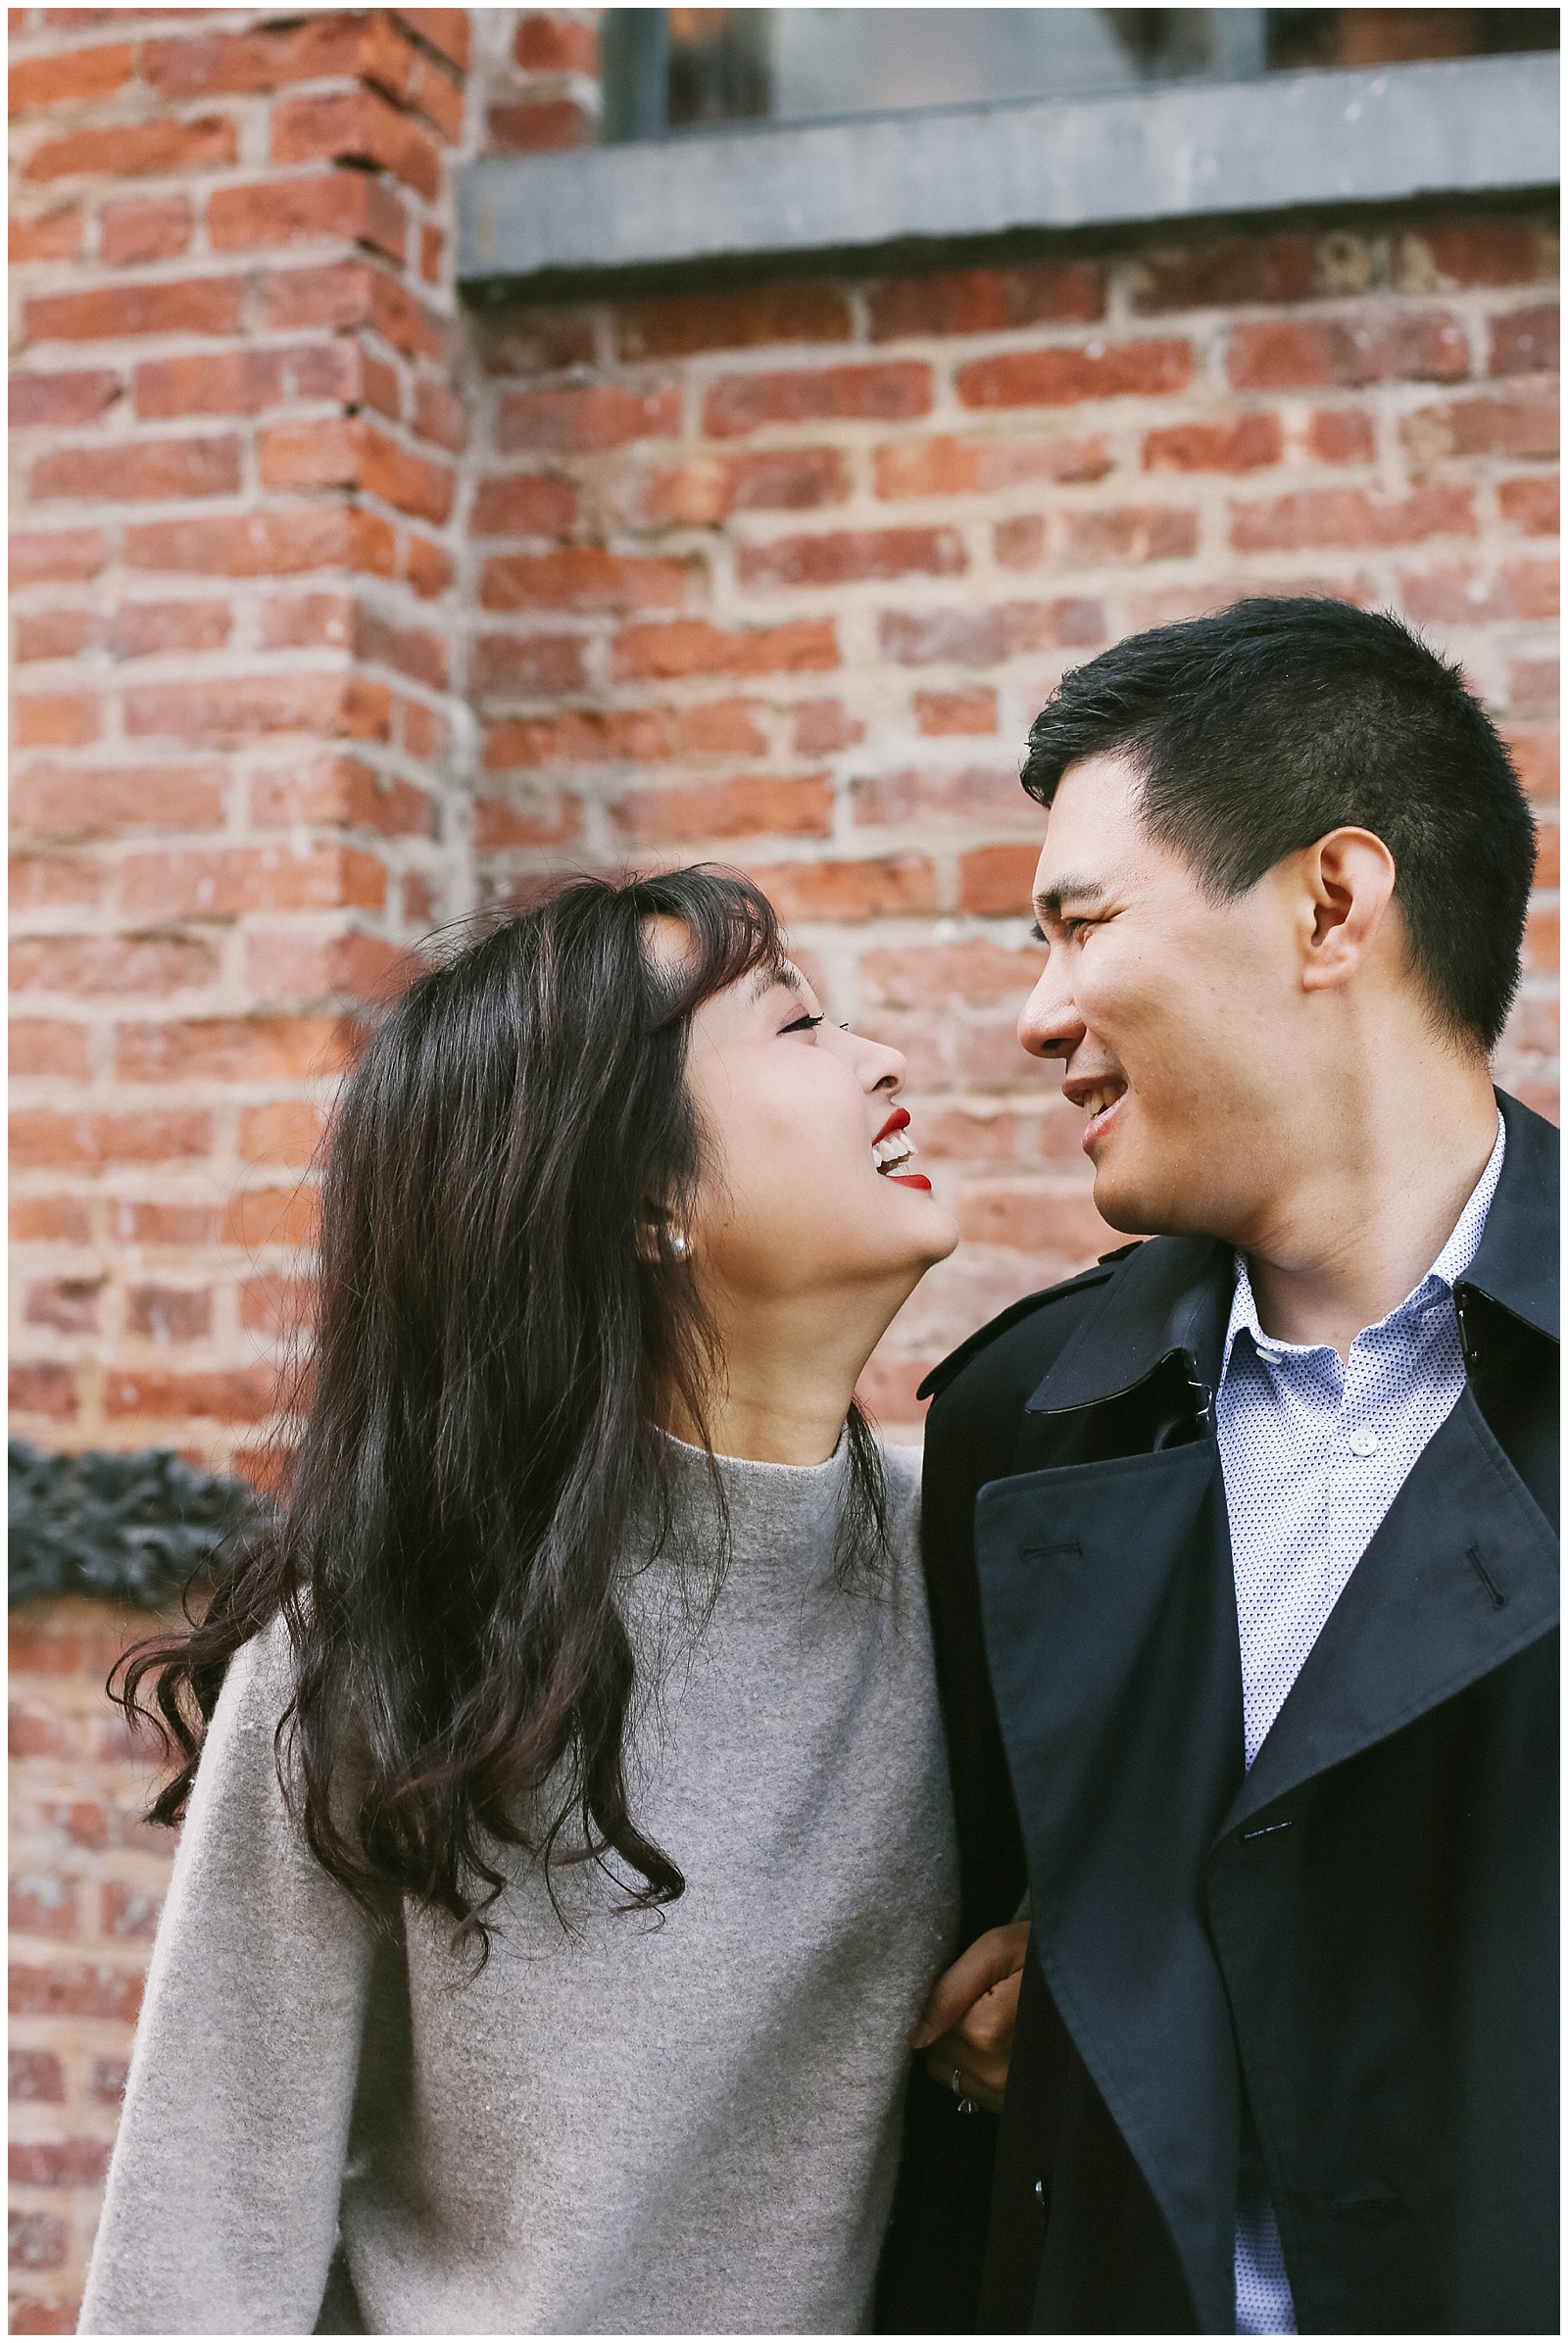 NYC engagement photographer photographs couple in Brooklyn DUMBO on Water Street